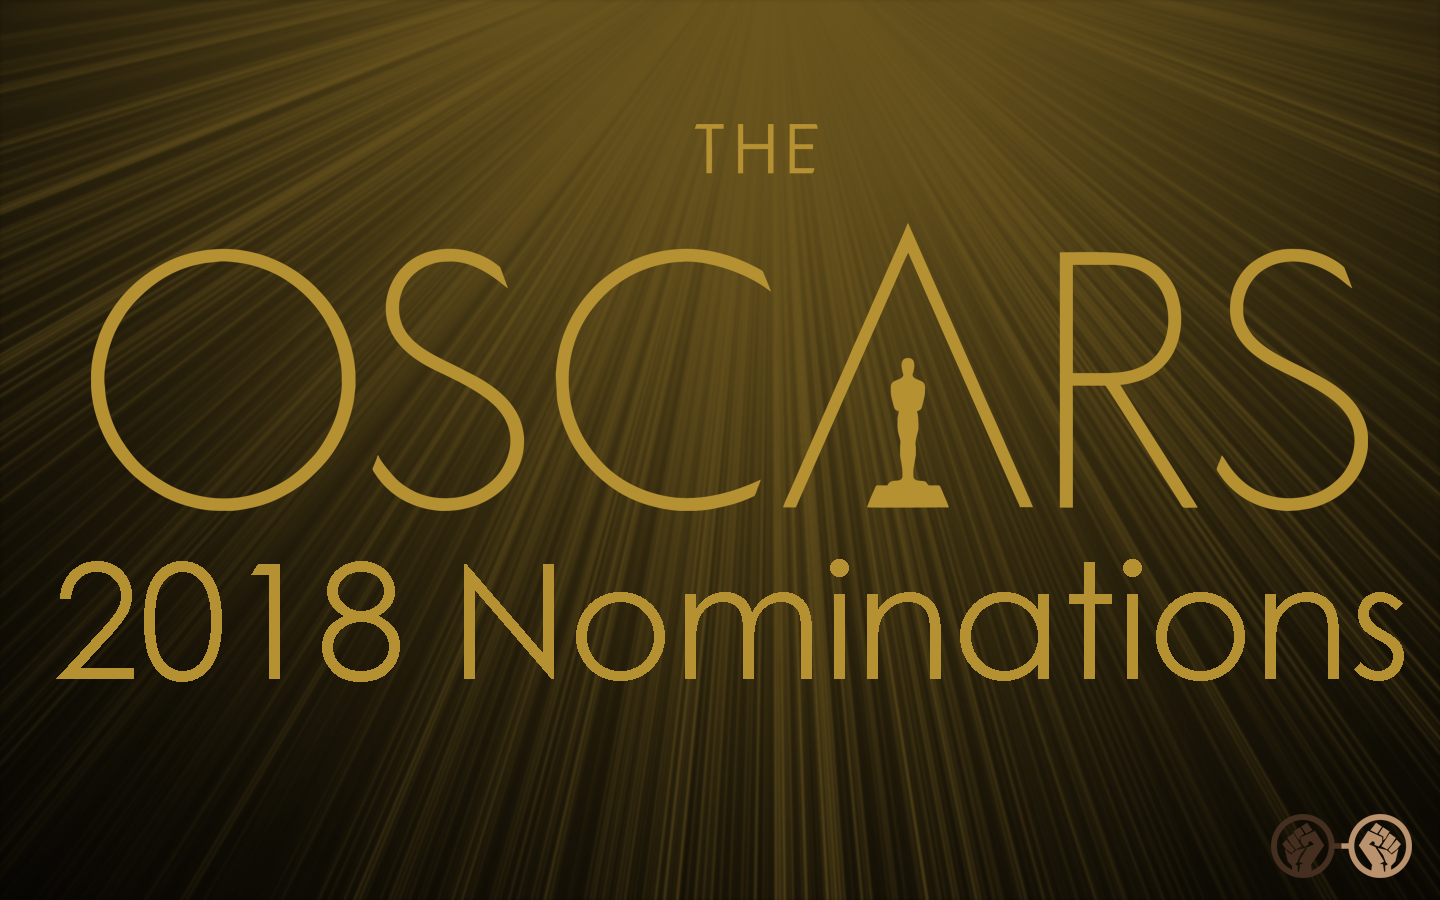 Oscar Nominations 2018: ‘The Shape of Water’ Leads with 13 Nominations, ‘Get Out’ Nominated for Best Picture